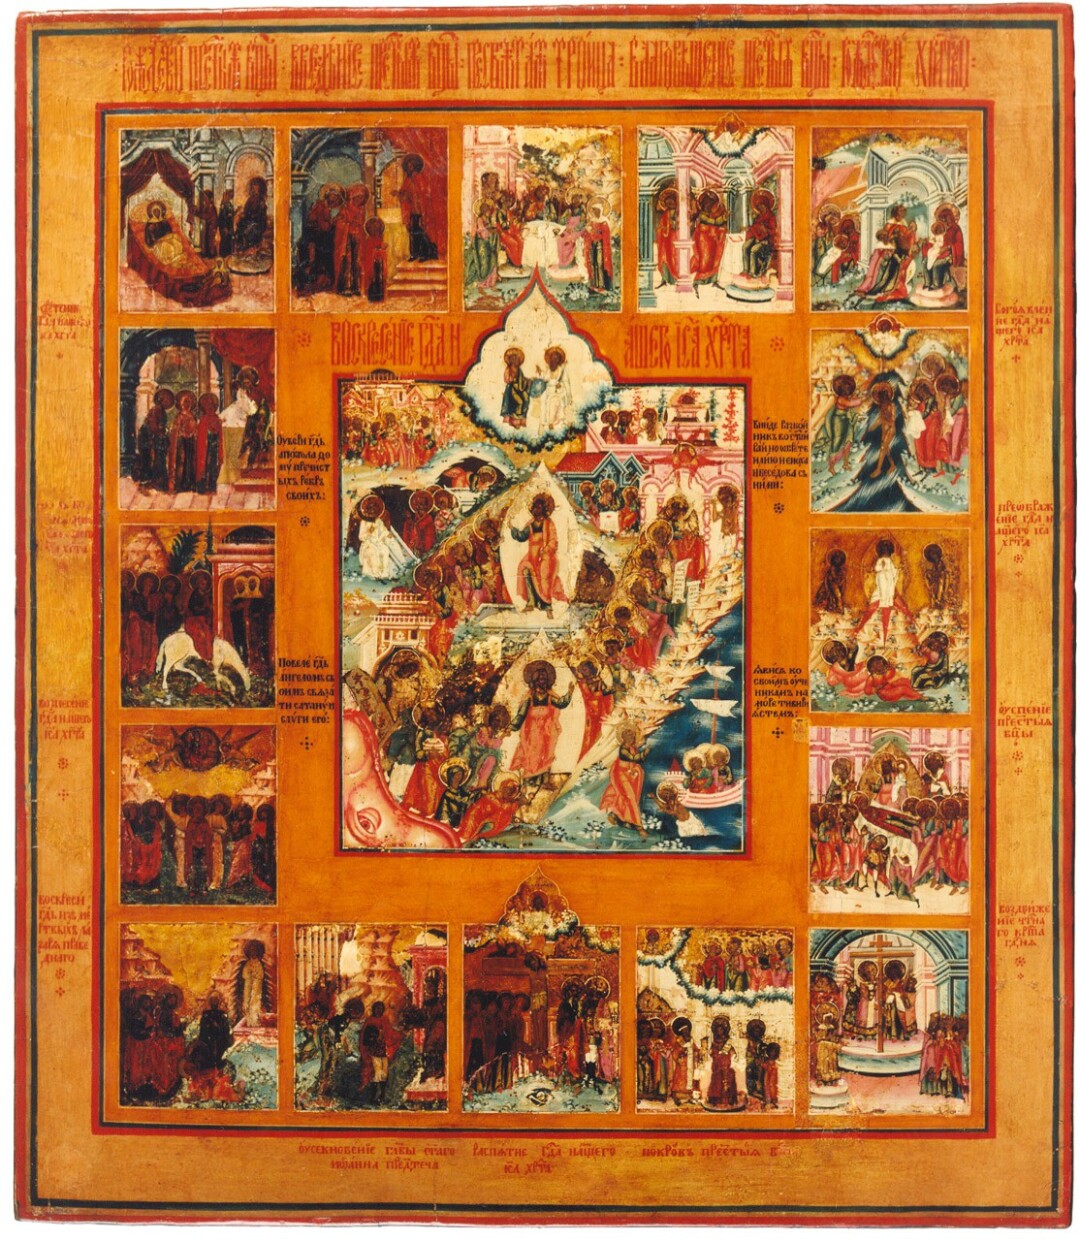 Resurrection, and sixteen feasts